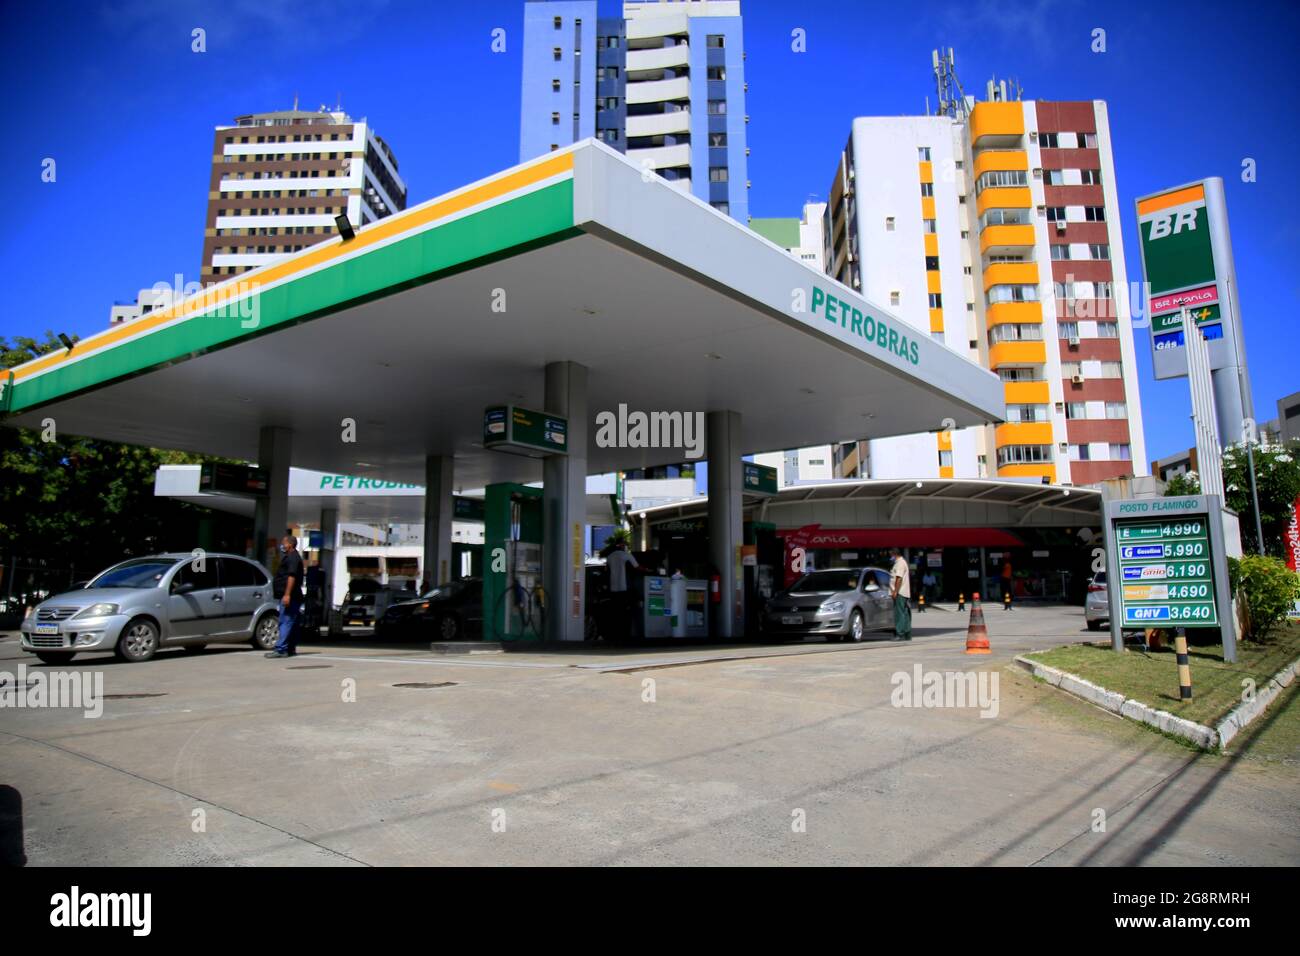 salvador, bahia, brazil - july 20, 2021: facade of a gas station of the Petrobras network in the city of Salvador. *** Local Caption *** Stock Photo